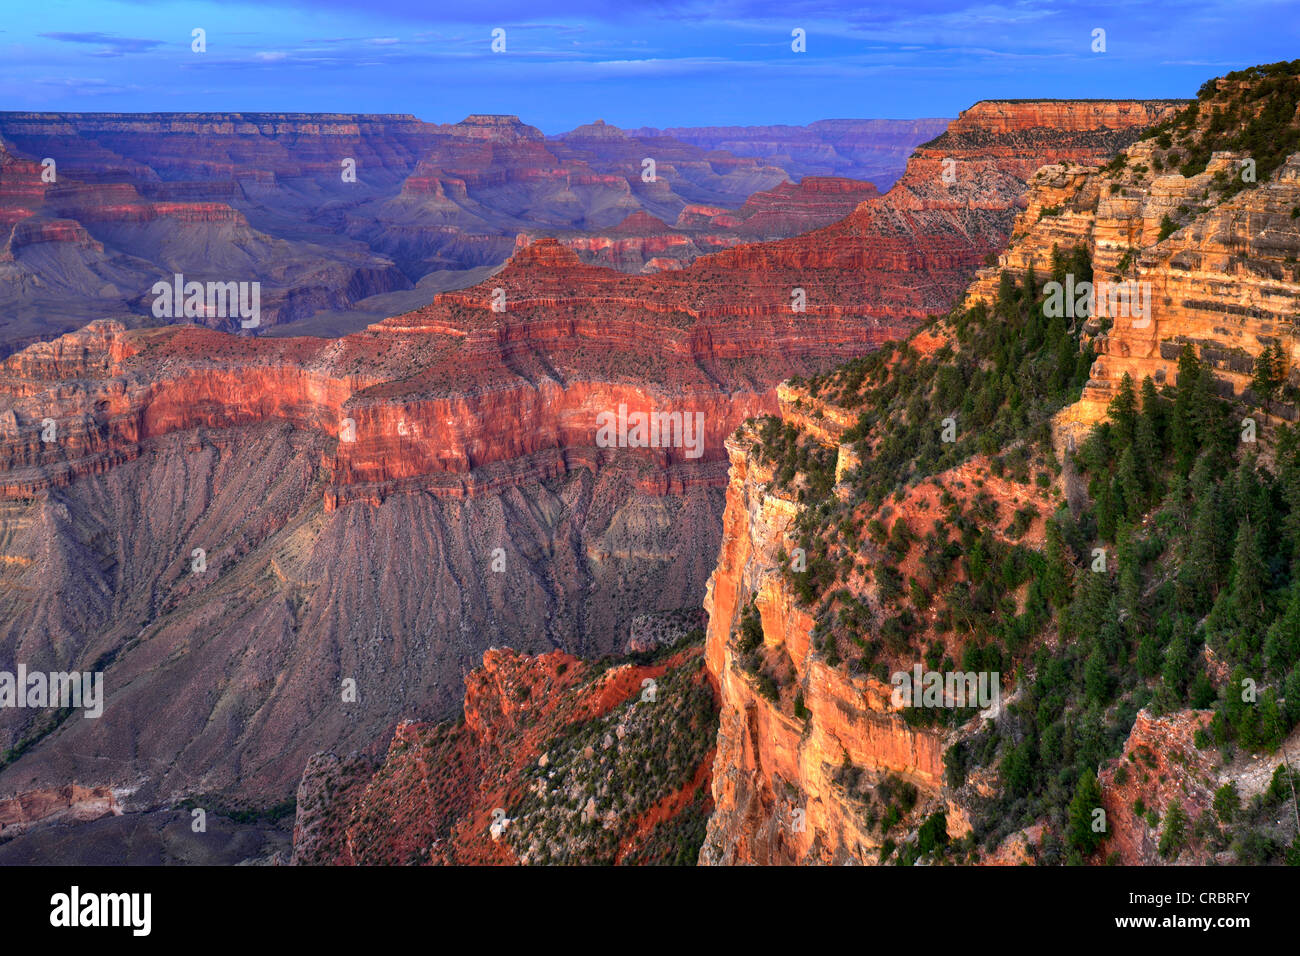 View of Vishnu Temple at sunset from Yavapai Point, Desert Palisades, Wotan's Throne, Comanche Point, evening light Stock Photo